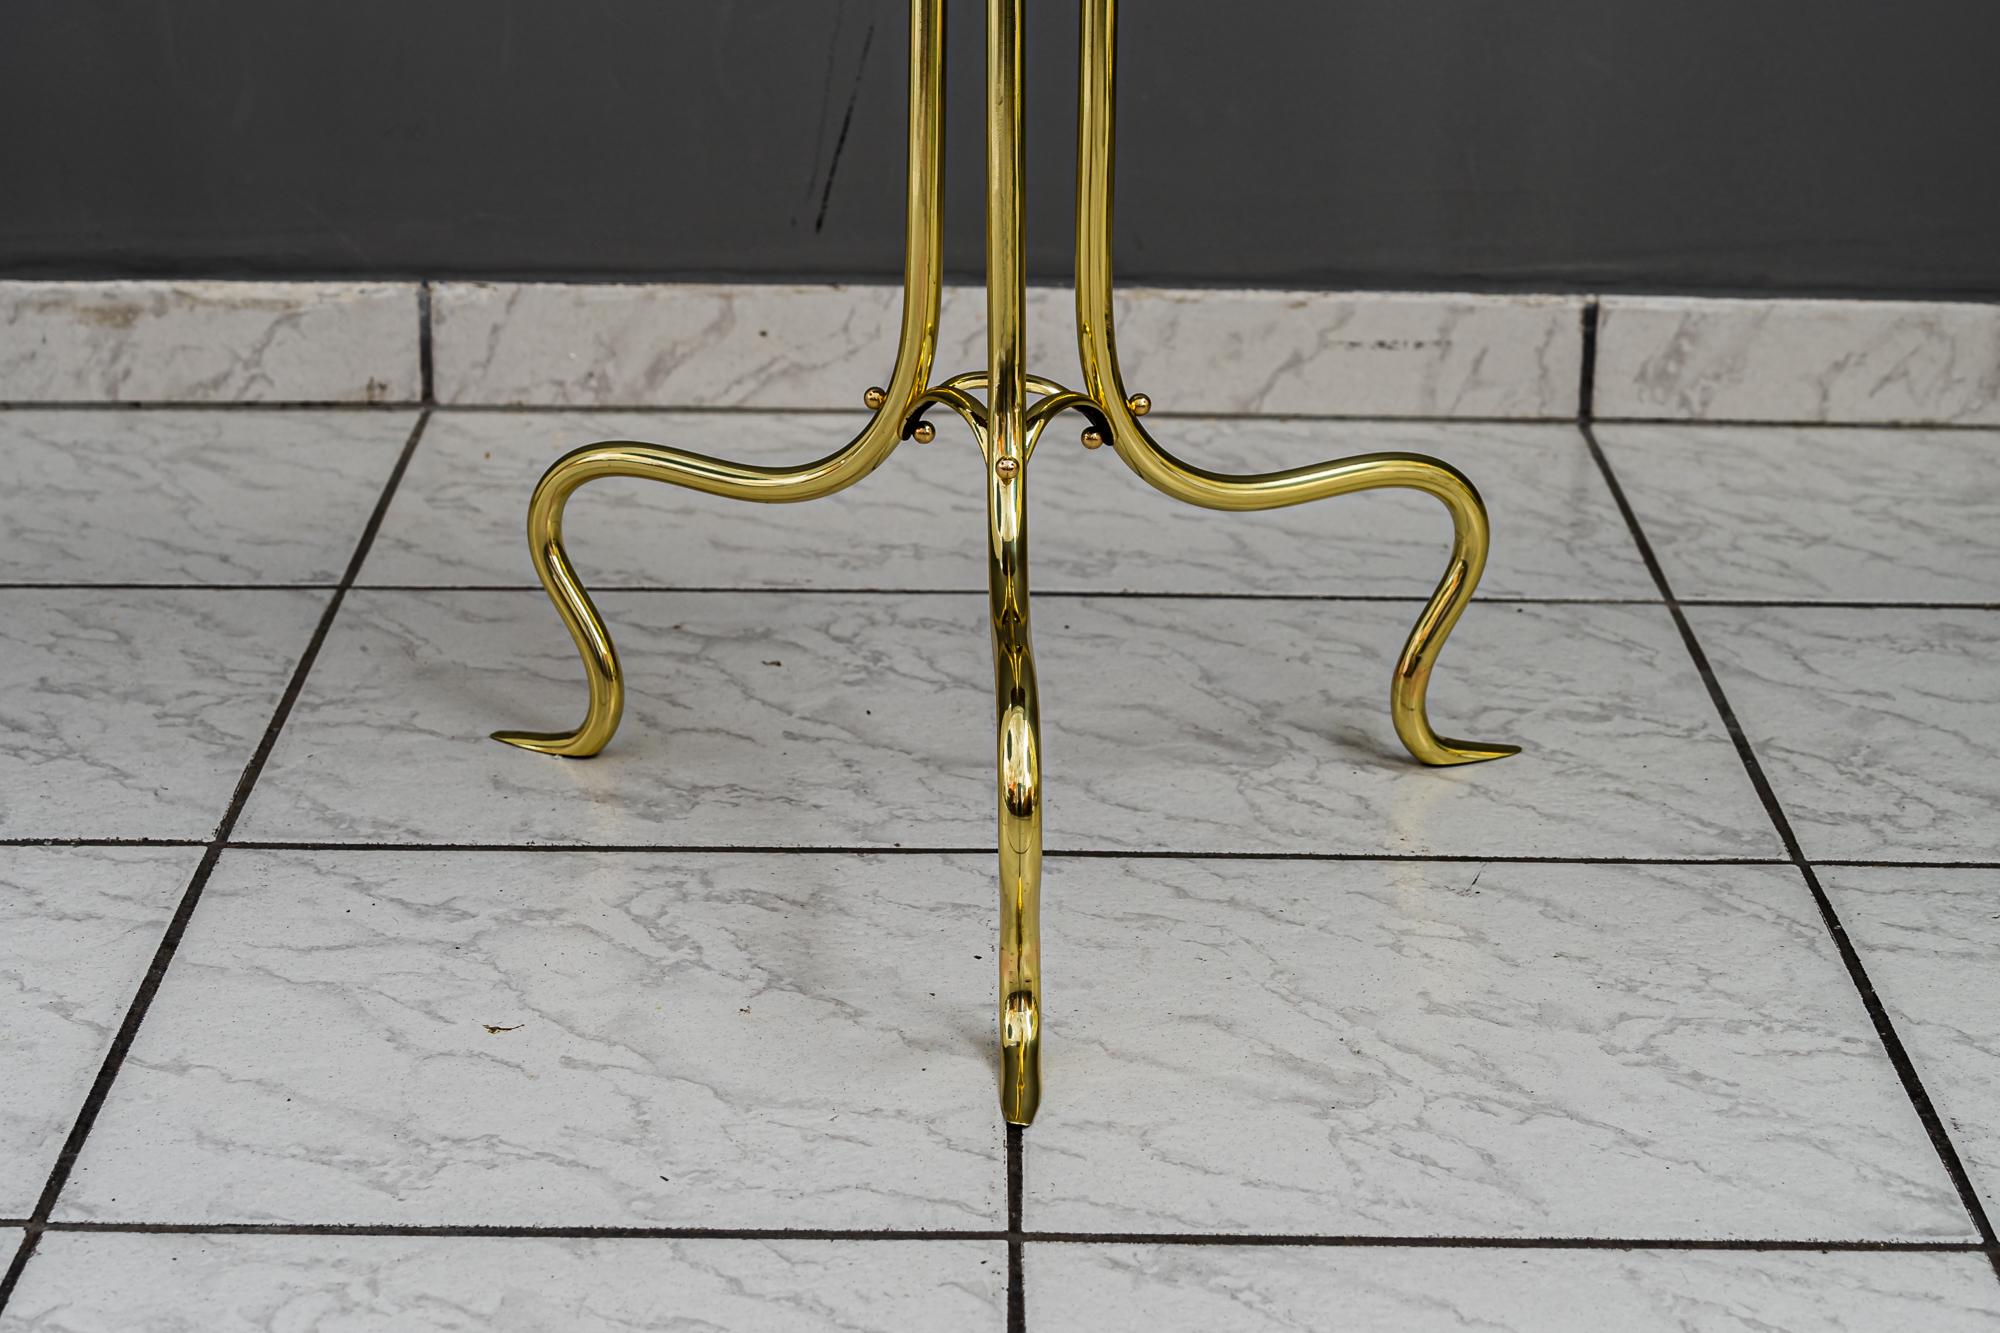 Rotatable magzine rack vienna around 1920s
Brass parts polished and stove enamelled
Wood polished.